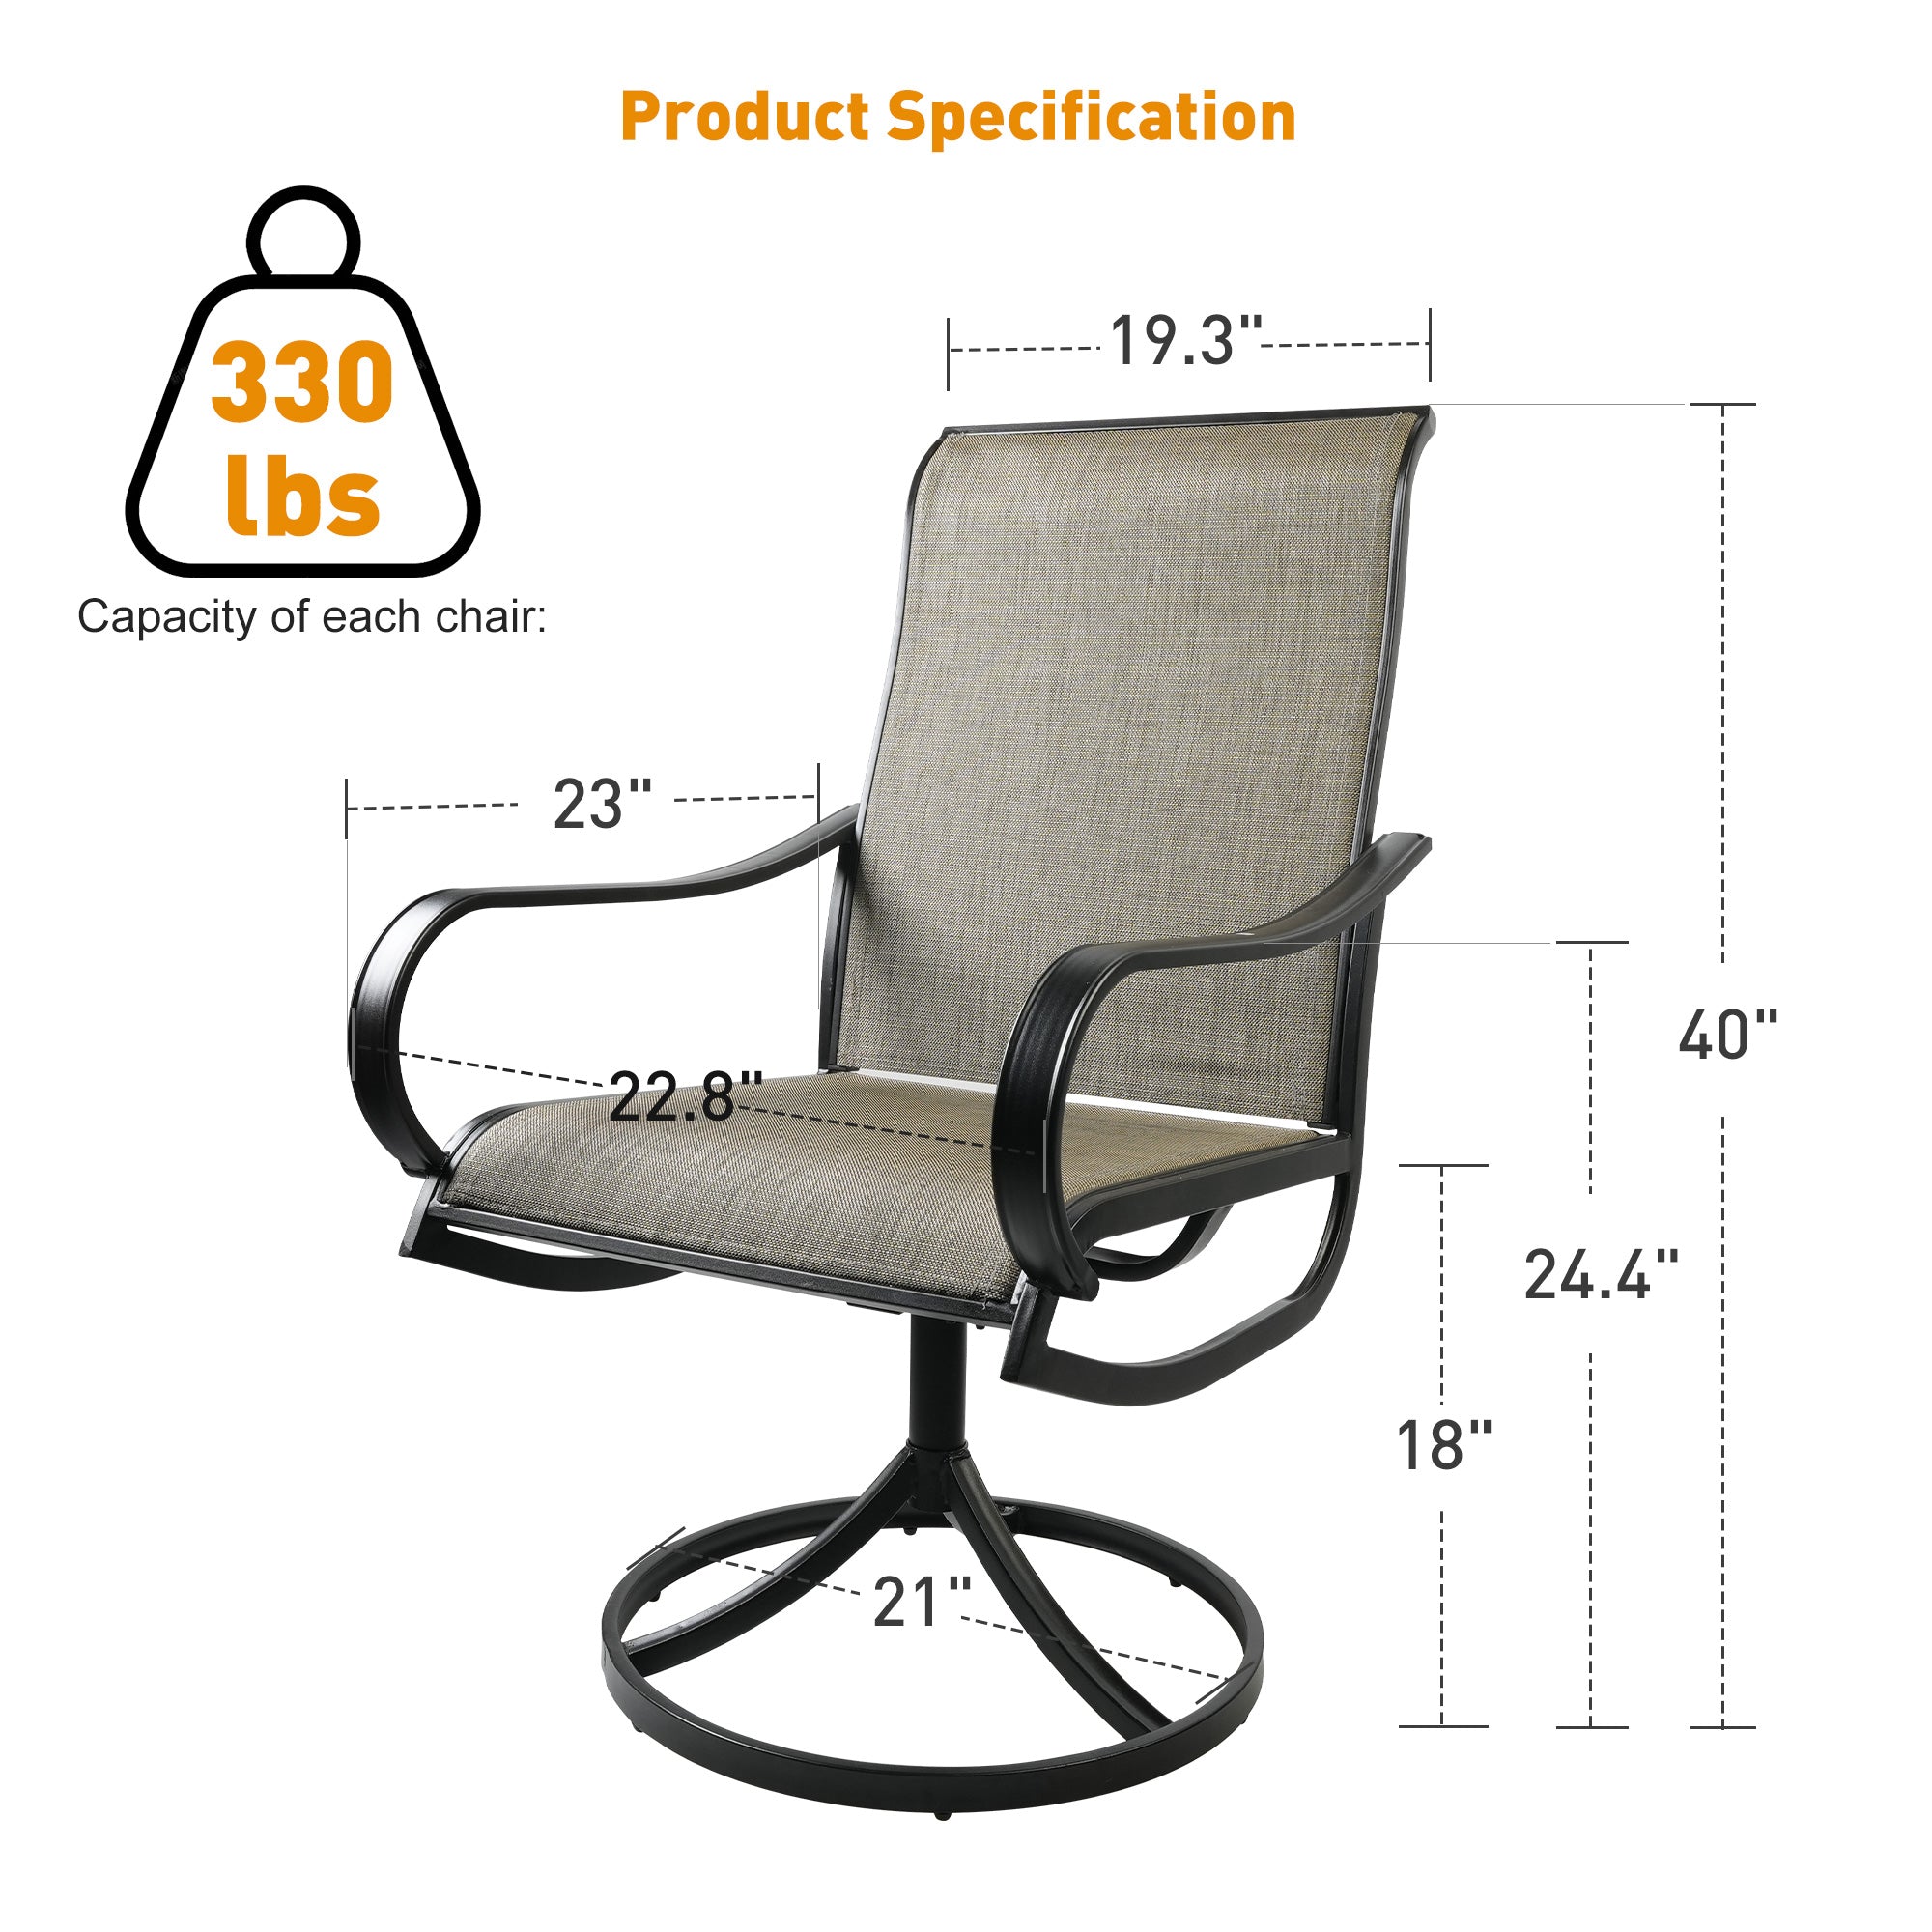 (Out of stock) Swivel Outdoor Dining Chairs Set of 2 Patio Textilene Mesh Fabric Chairs